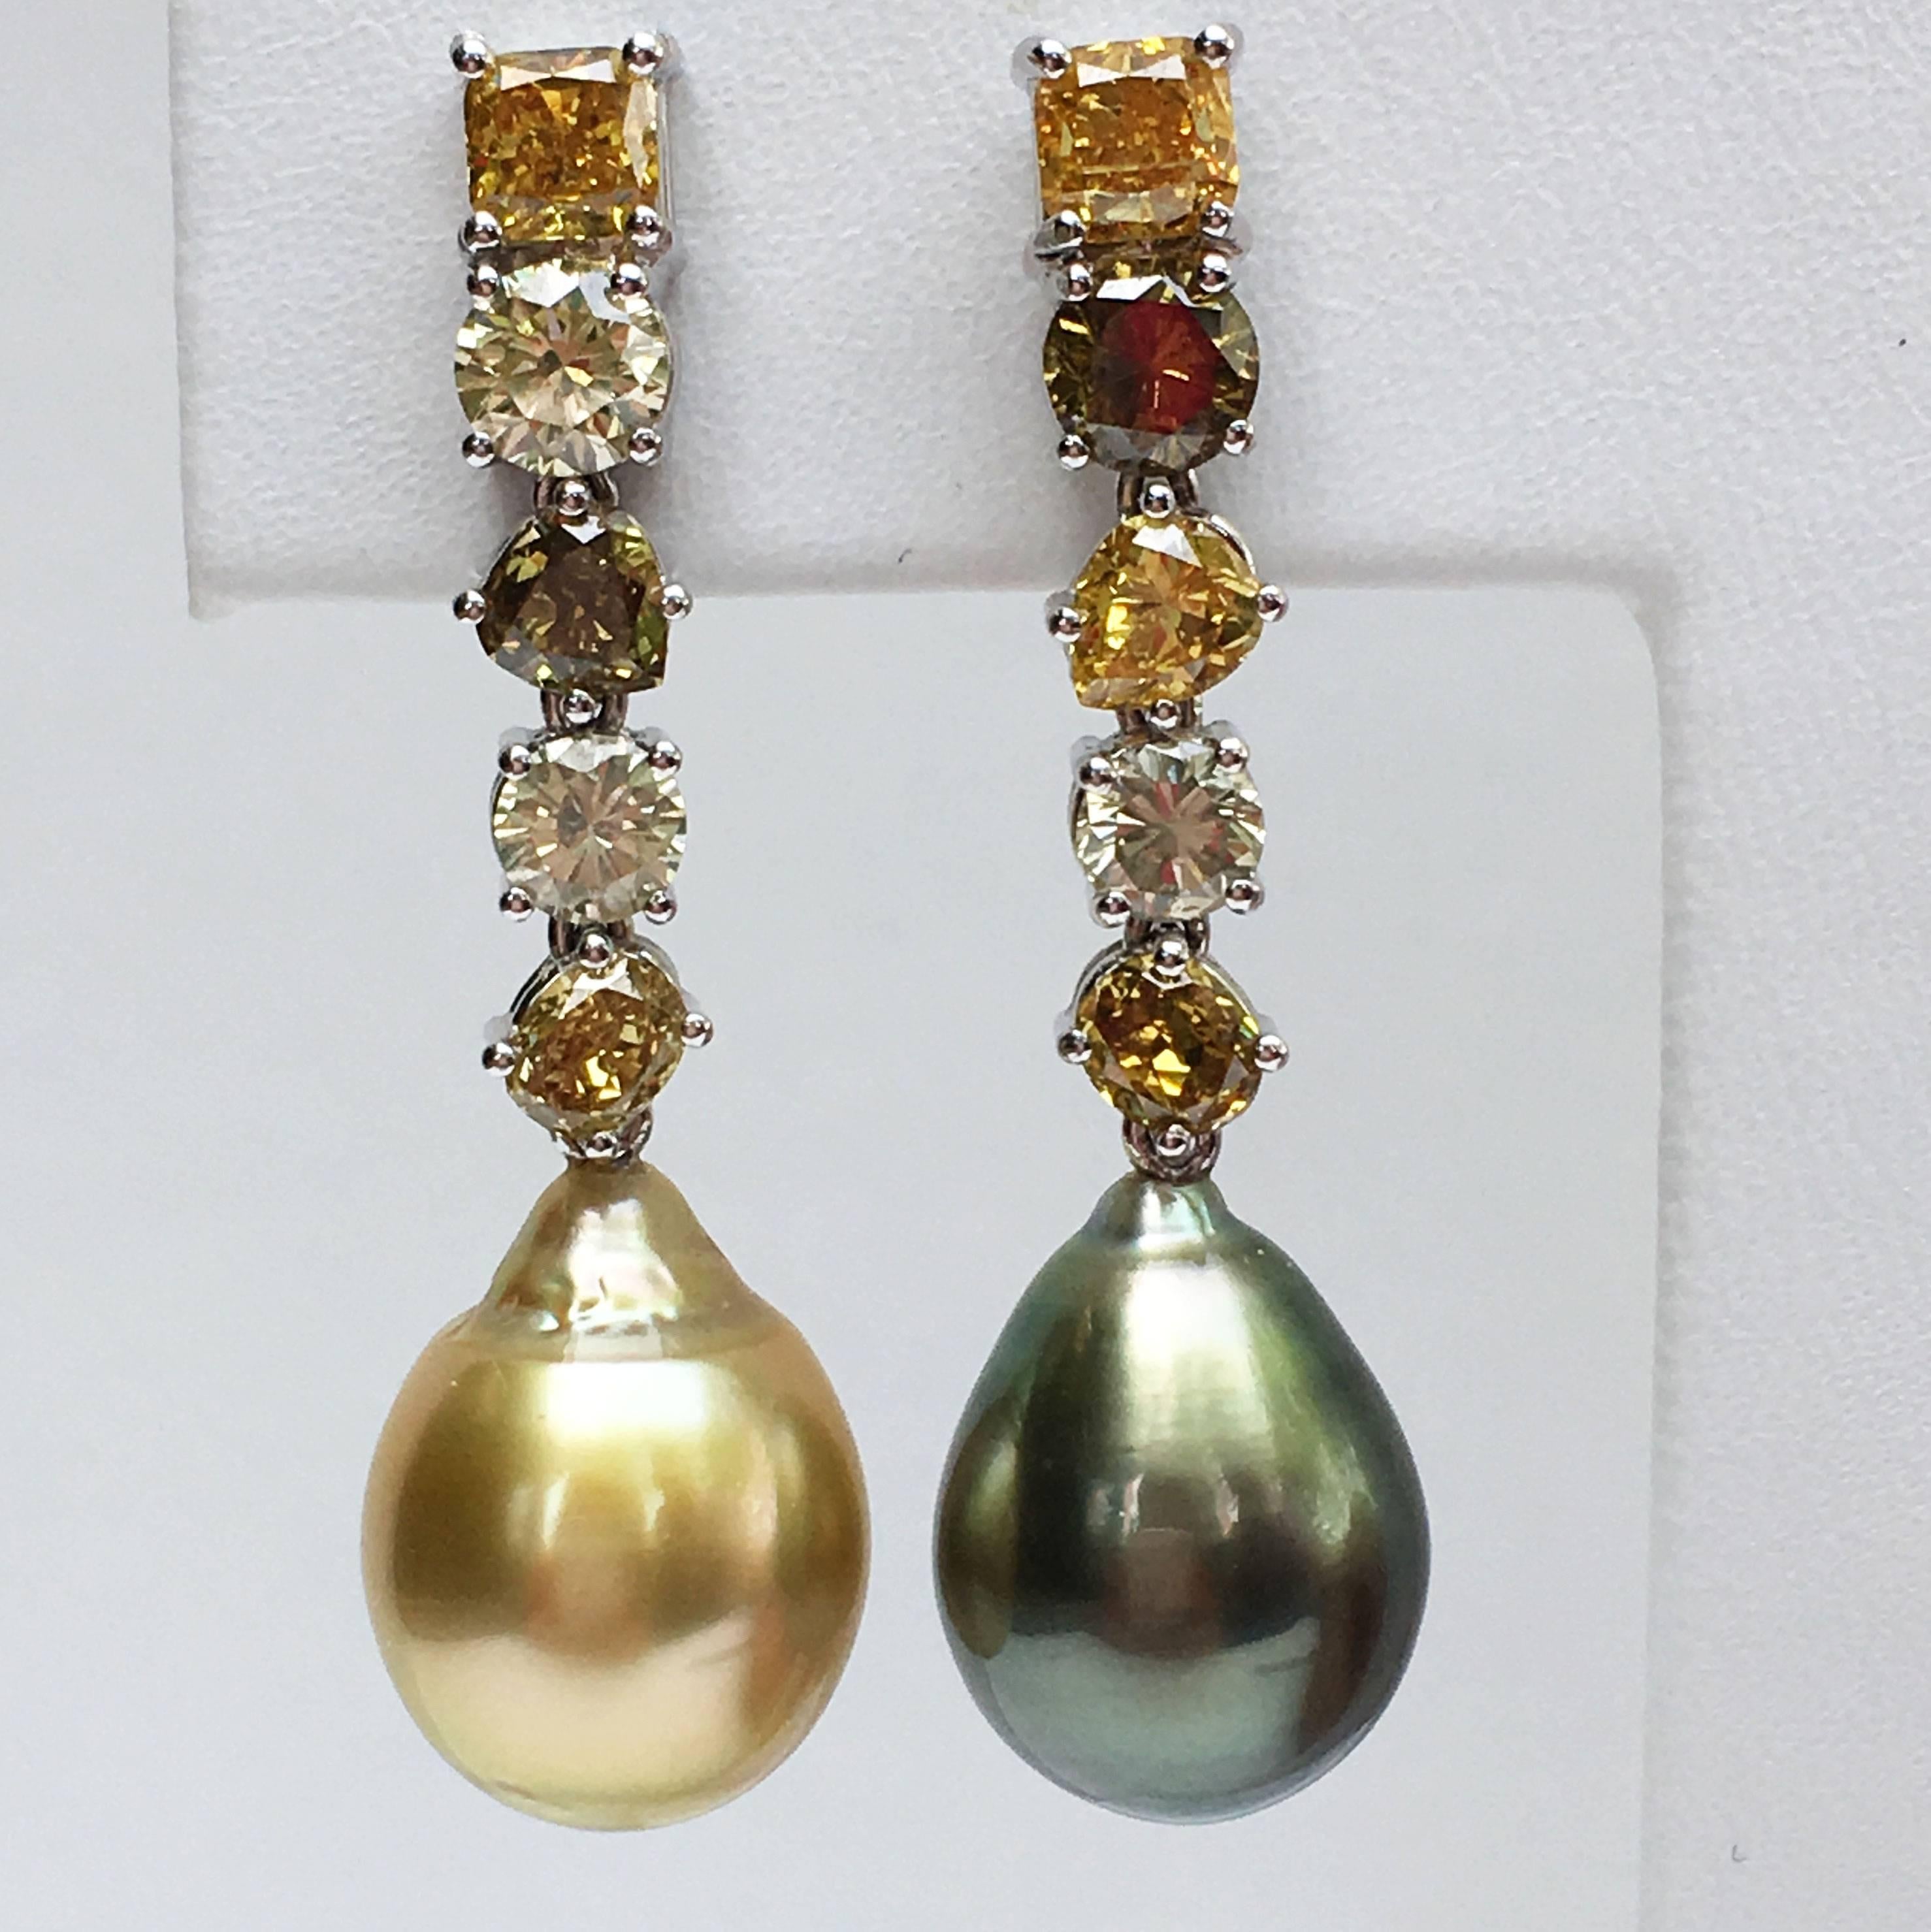 2 real rare and exotic Fiji cultured pearls, drop shape, mix and match color ( yellow and greenish ) with corresponding natural colored 10 Fancy Diamonds of 3,17 ct. total weight / clarity si set in white gold 18Karat

Outstanding colors in a one of